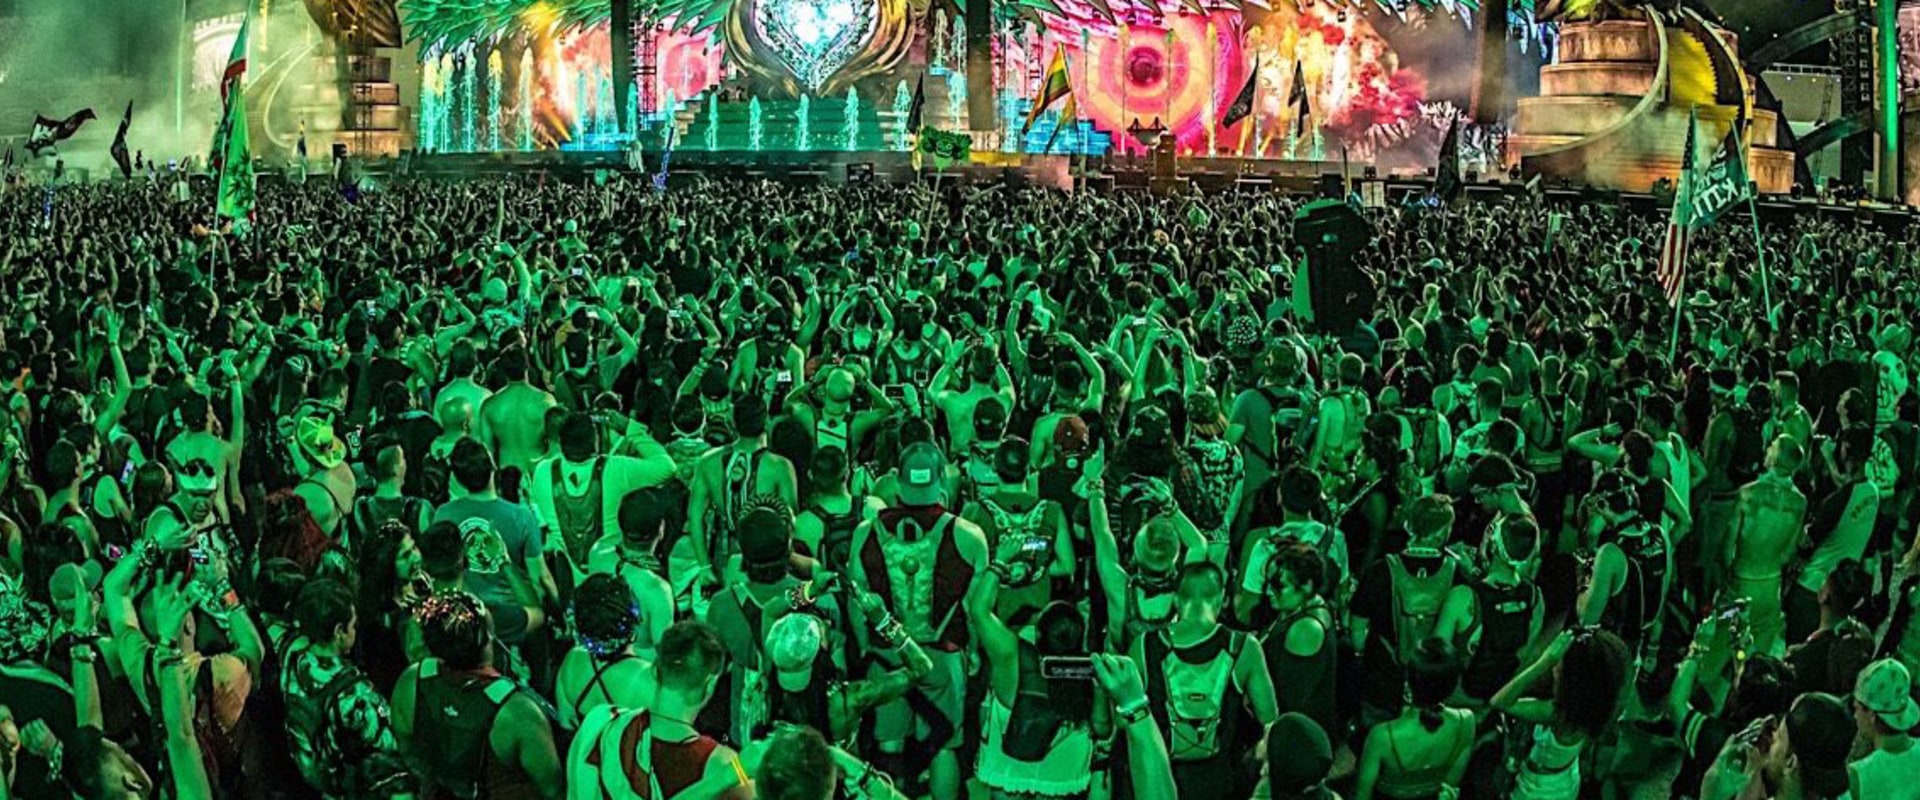 What are the most popular music festivals?